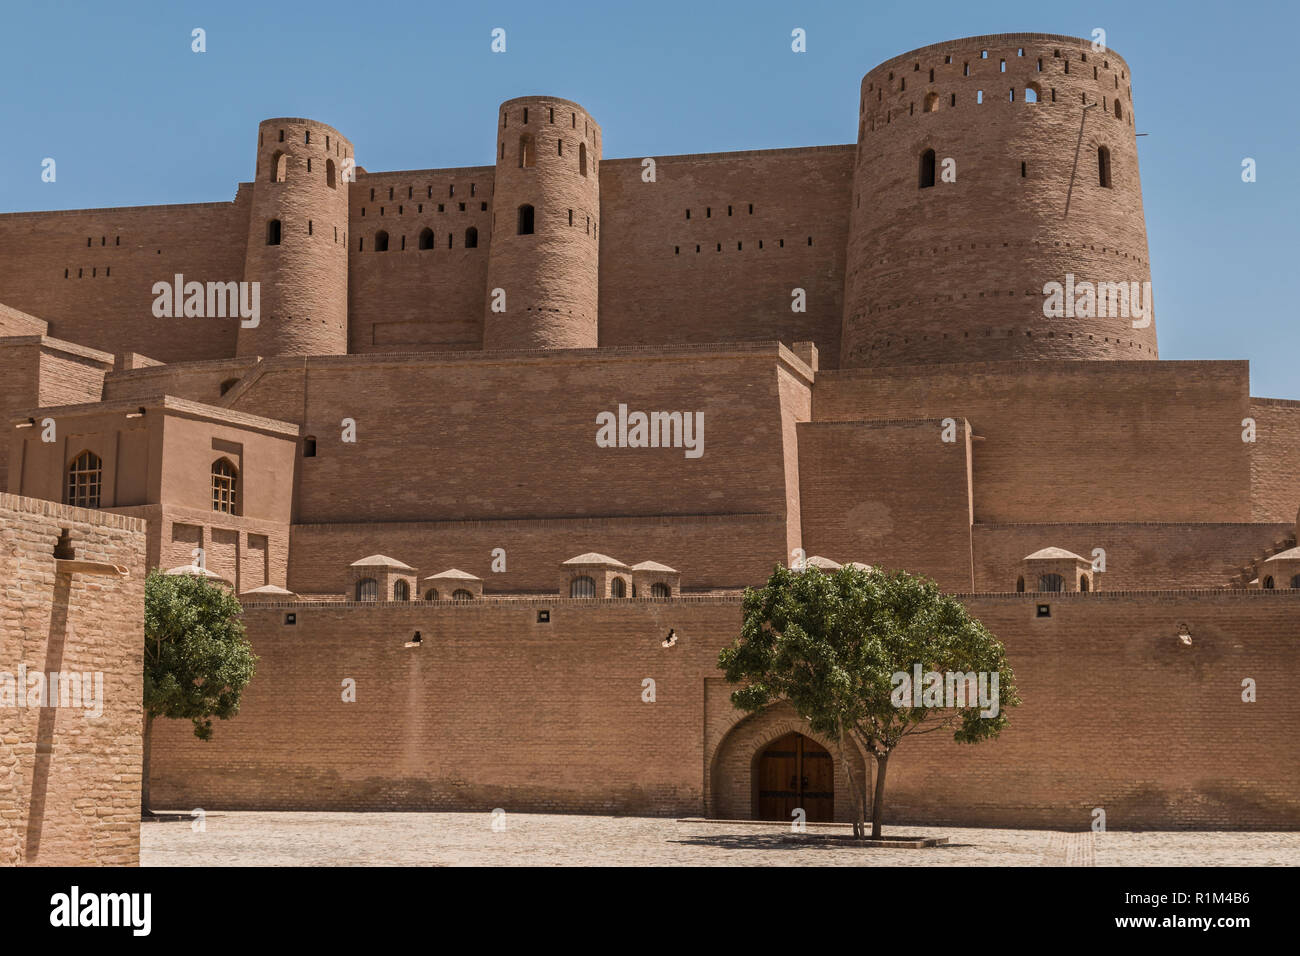 The Citadel of Herat also known as the Citadel of Alexander, Afghanistan Stock Photo